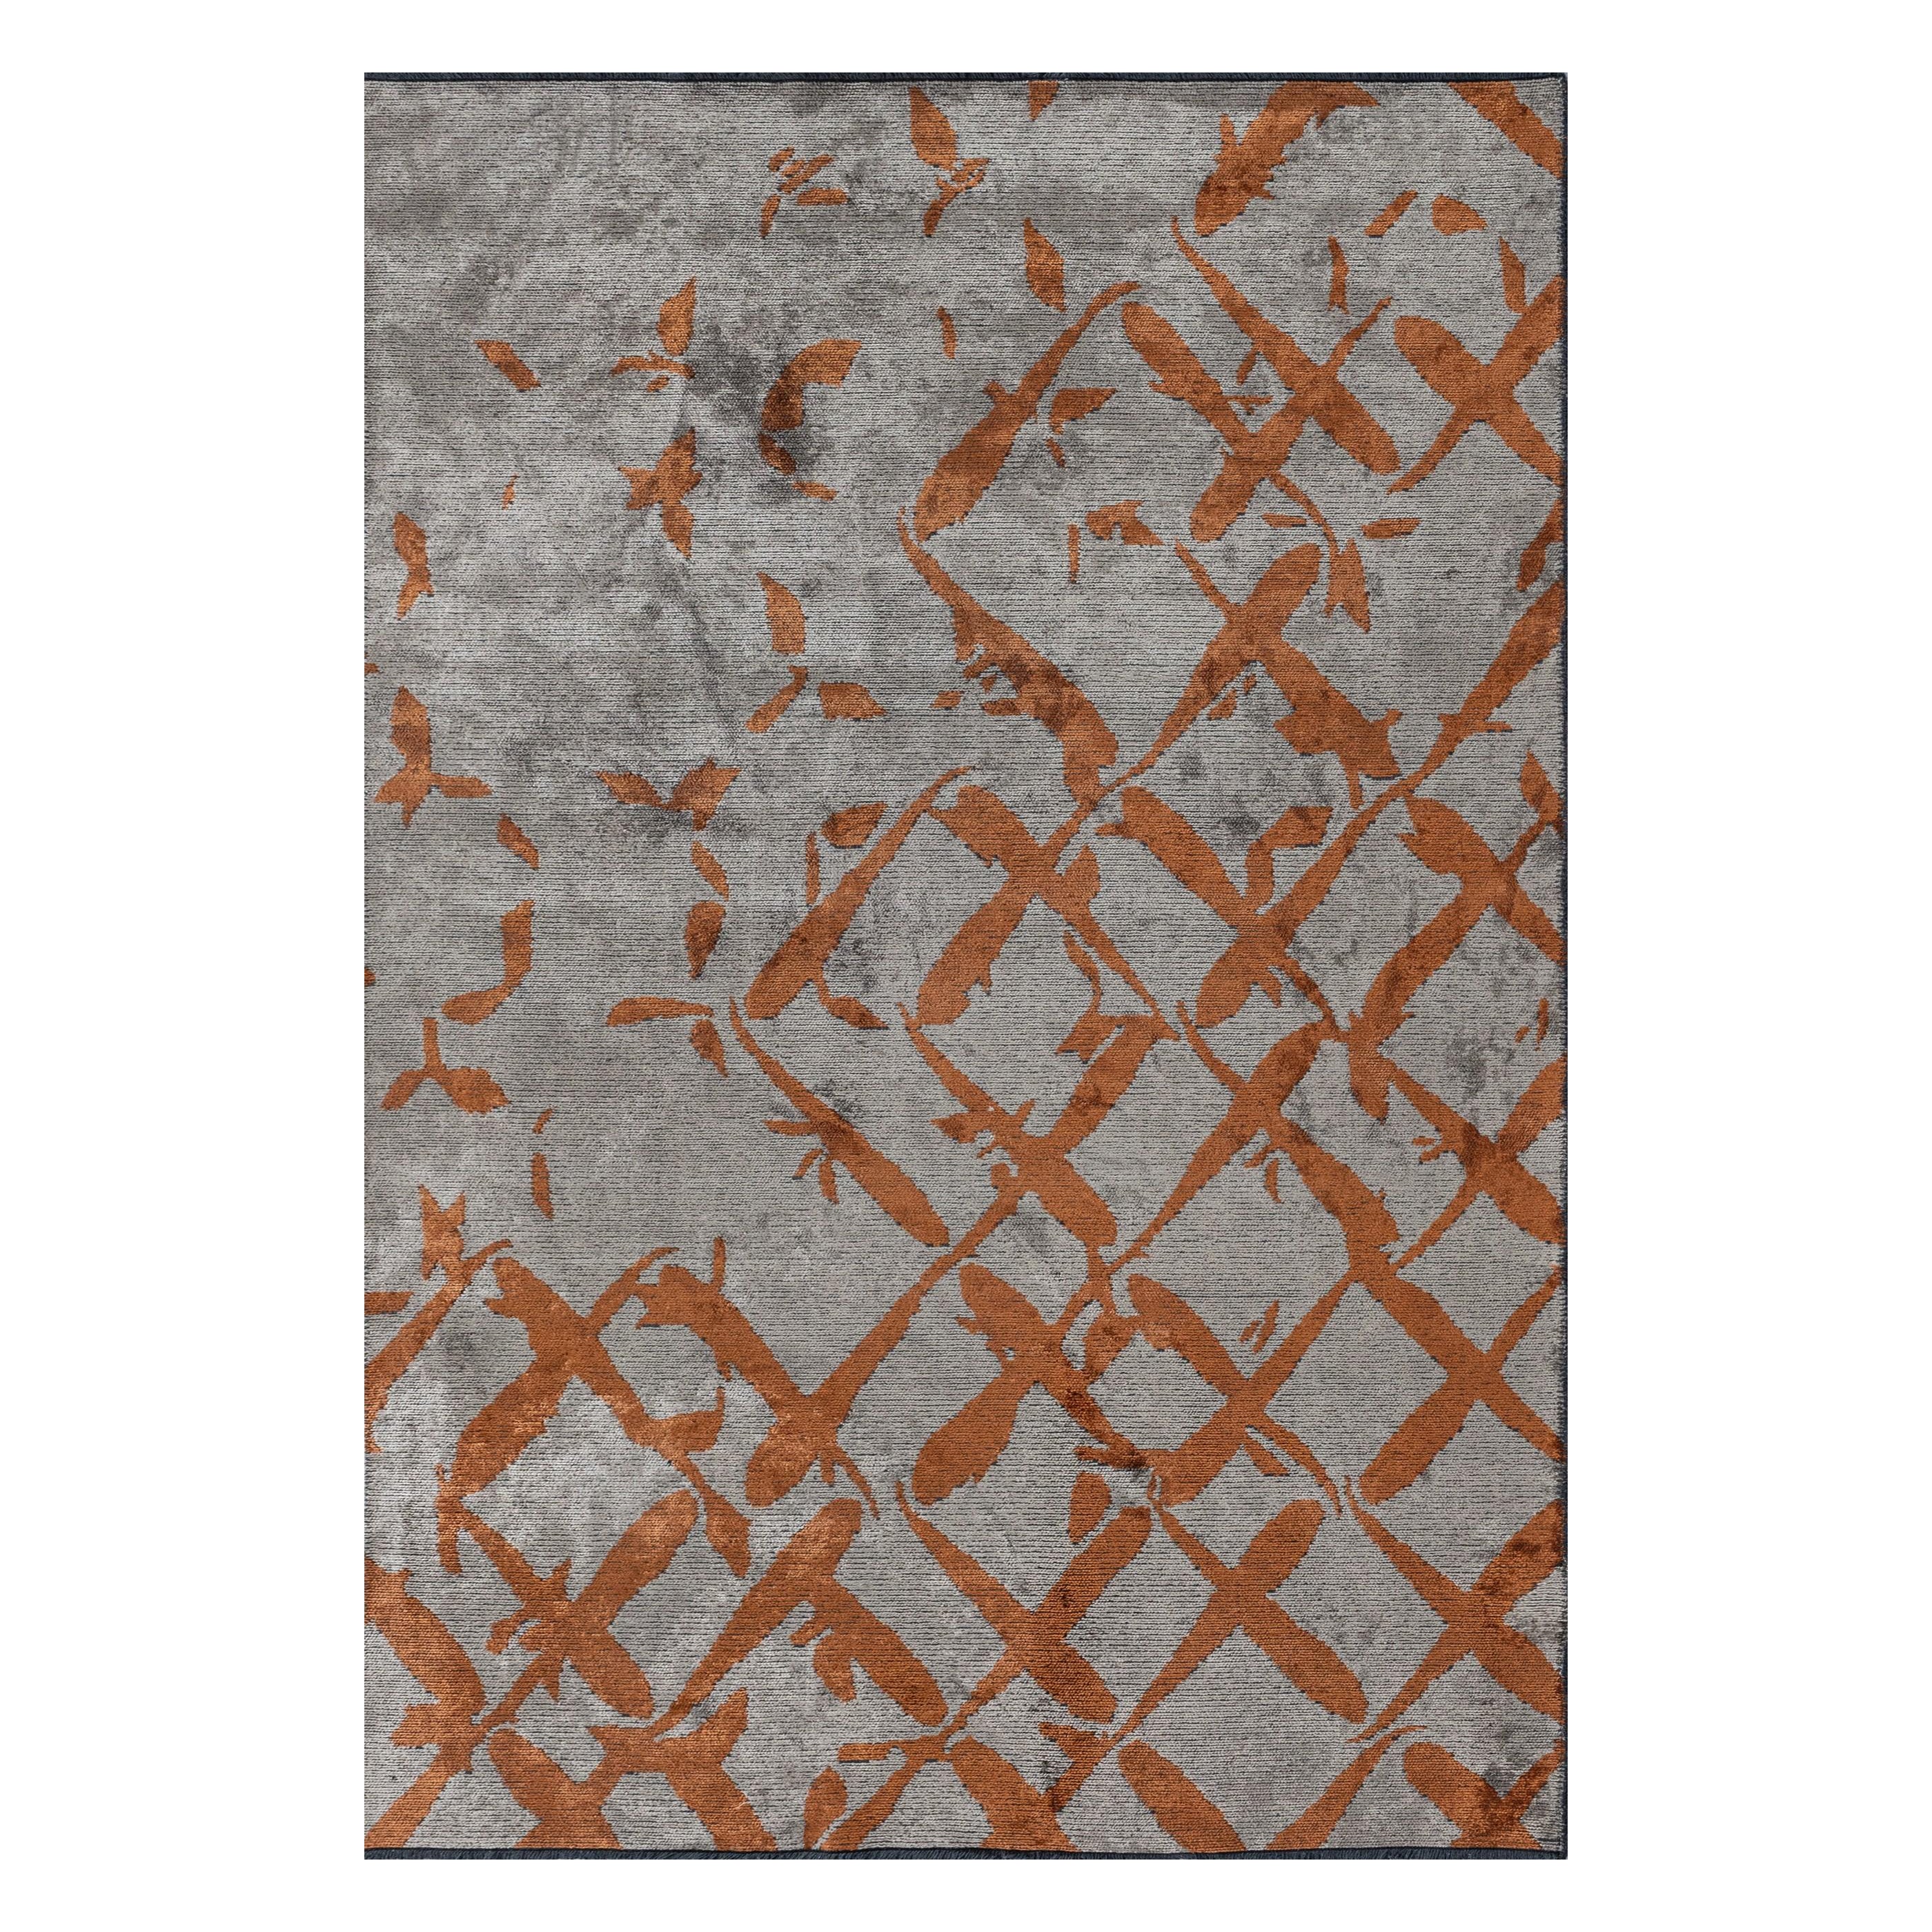 For Sale:  (Beige) Modern Abstract Luxury Hand-Finished Area Rug